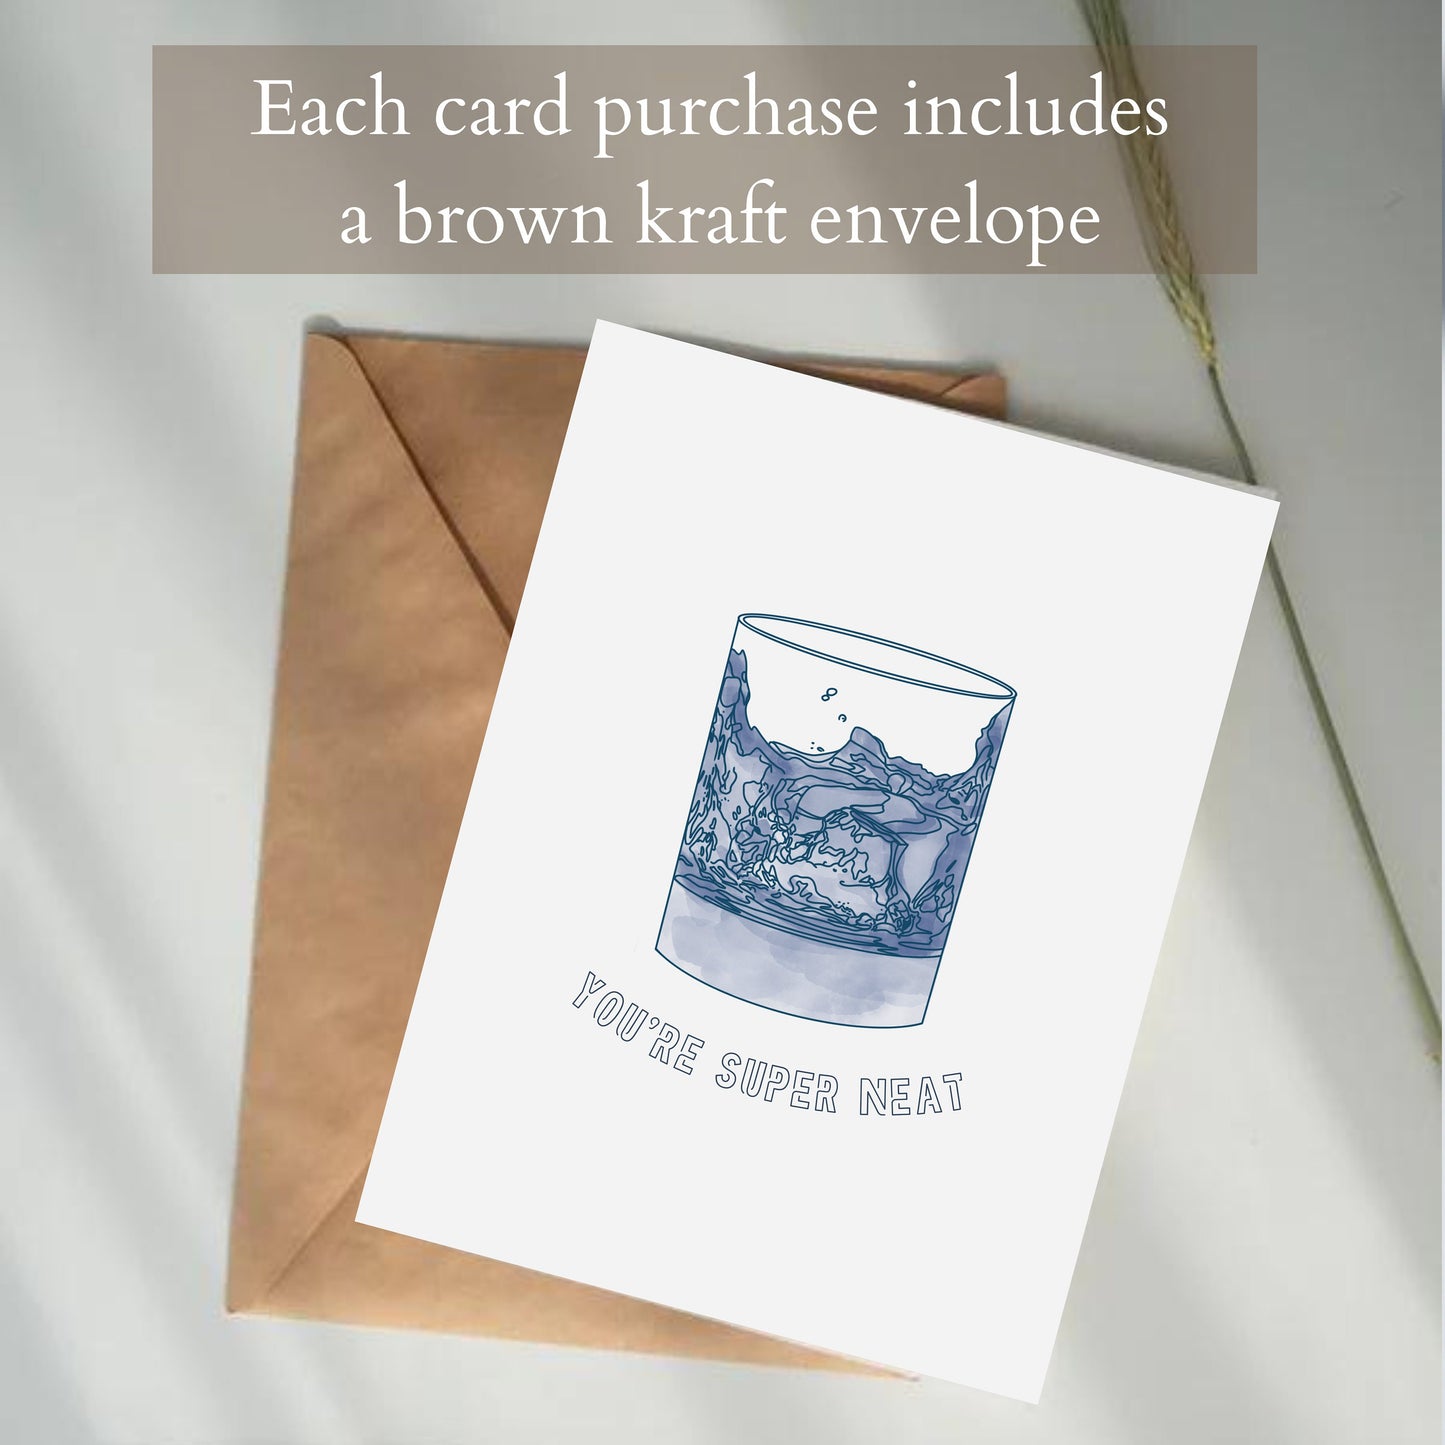 brown kraft envelope comes with each greeting card